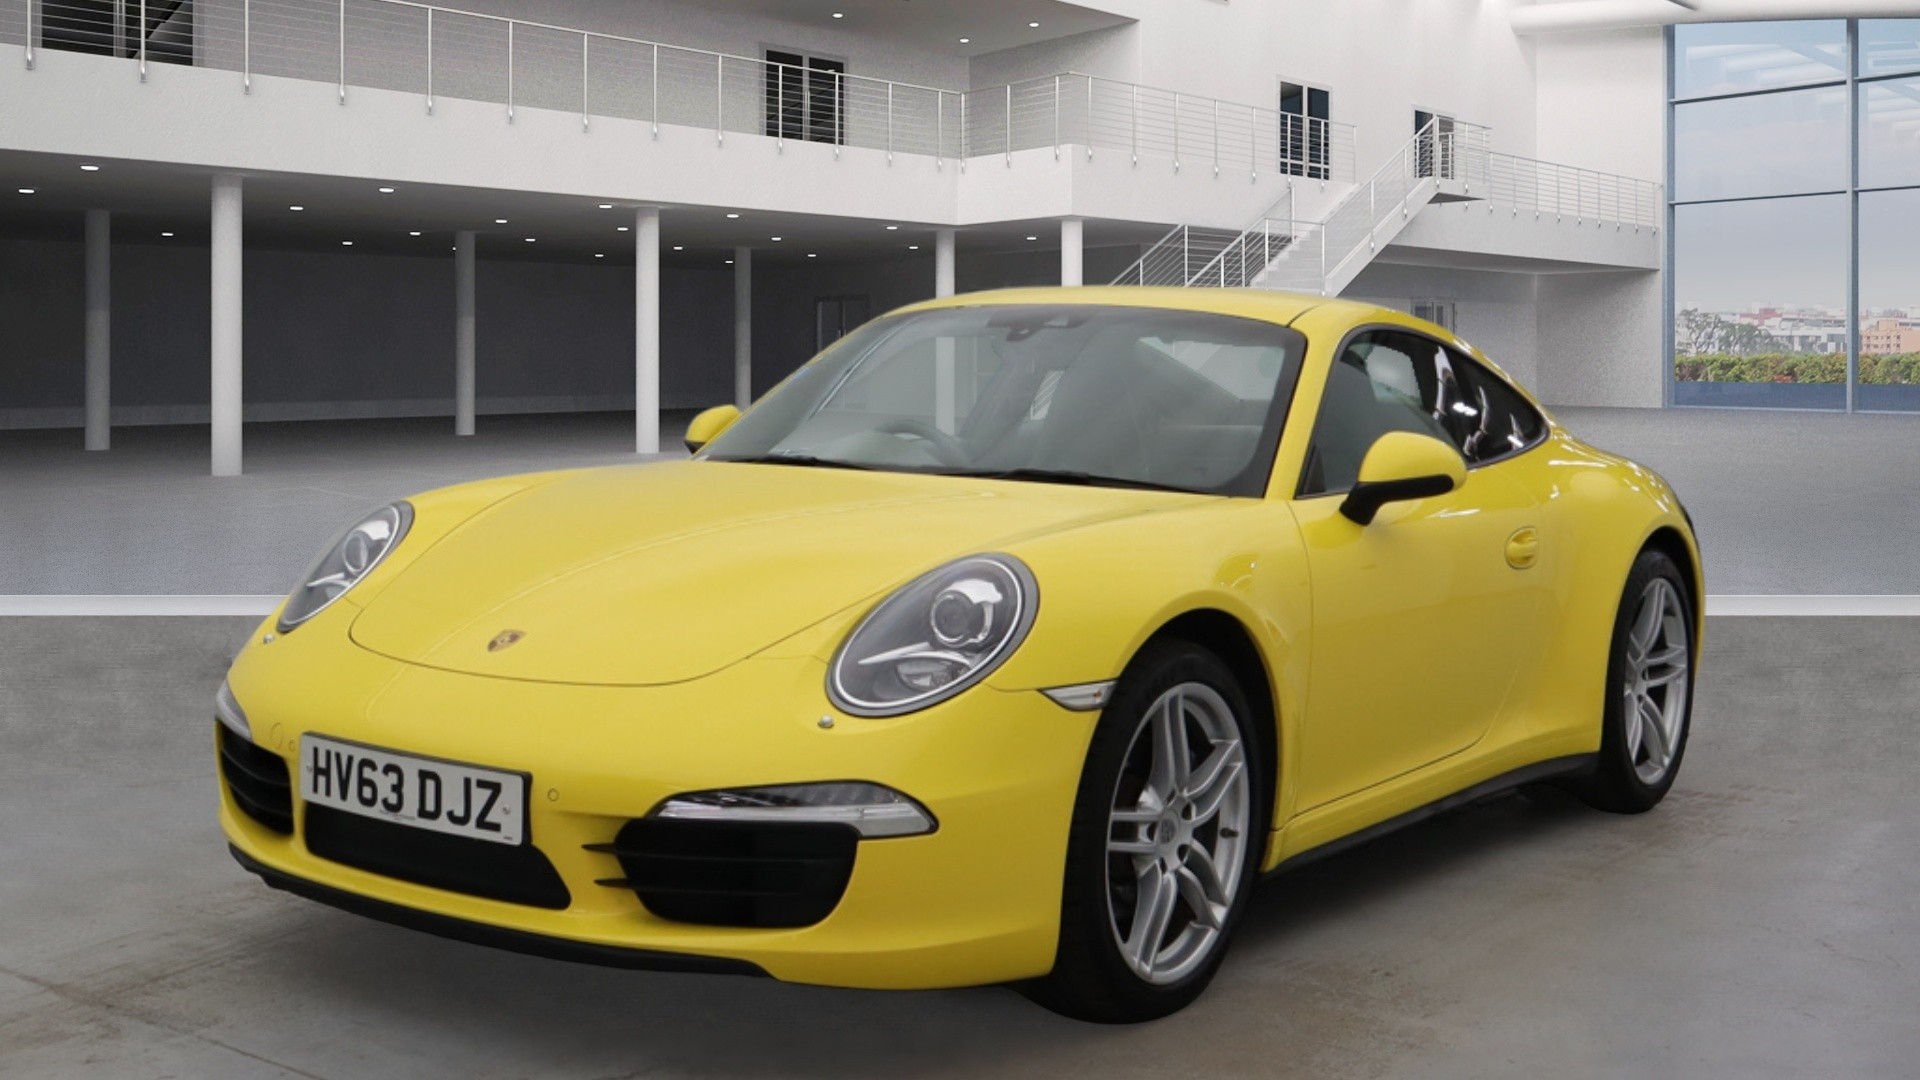 Best 911 for 1st time owner under 65k? - Page 3 - 911/Carrera GT - PistonHeads UK - The image is a studio photograph of a yellow Porsche sports car displayed indoors. It has a sleek design, with the vehicle's hood open, showcasing the engine. There are no visible texts or logos in the image. The background is minimalistic, featuring a gray floor and white walls that give the impression of a clean and spacious showroom or warehouse. The car is positioned on a smooth surface, likely to highlight its features and design.